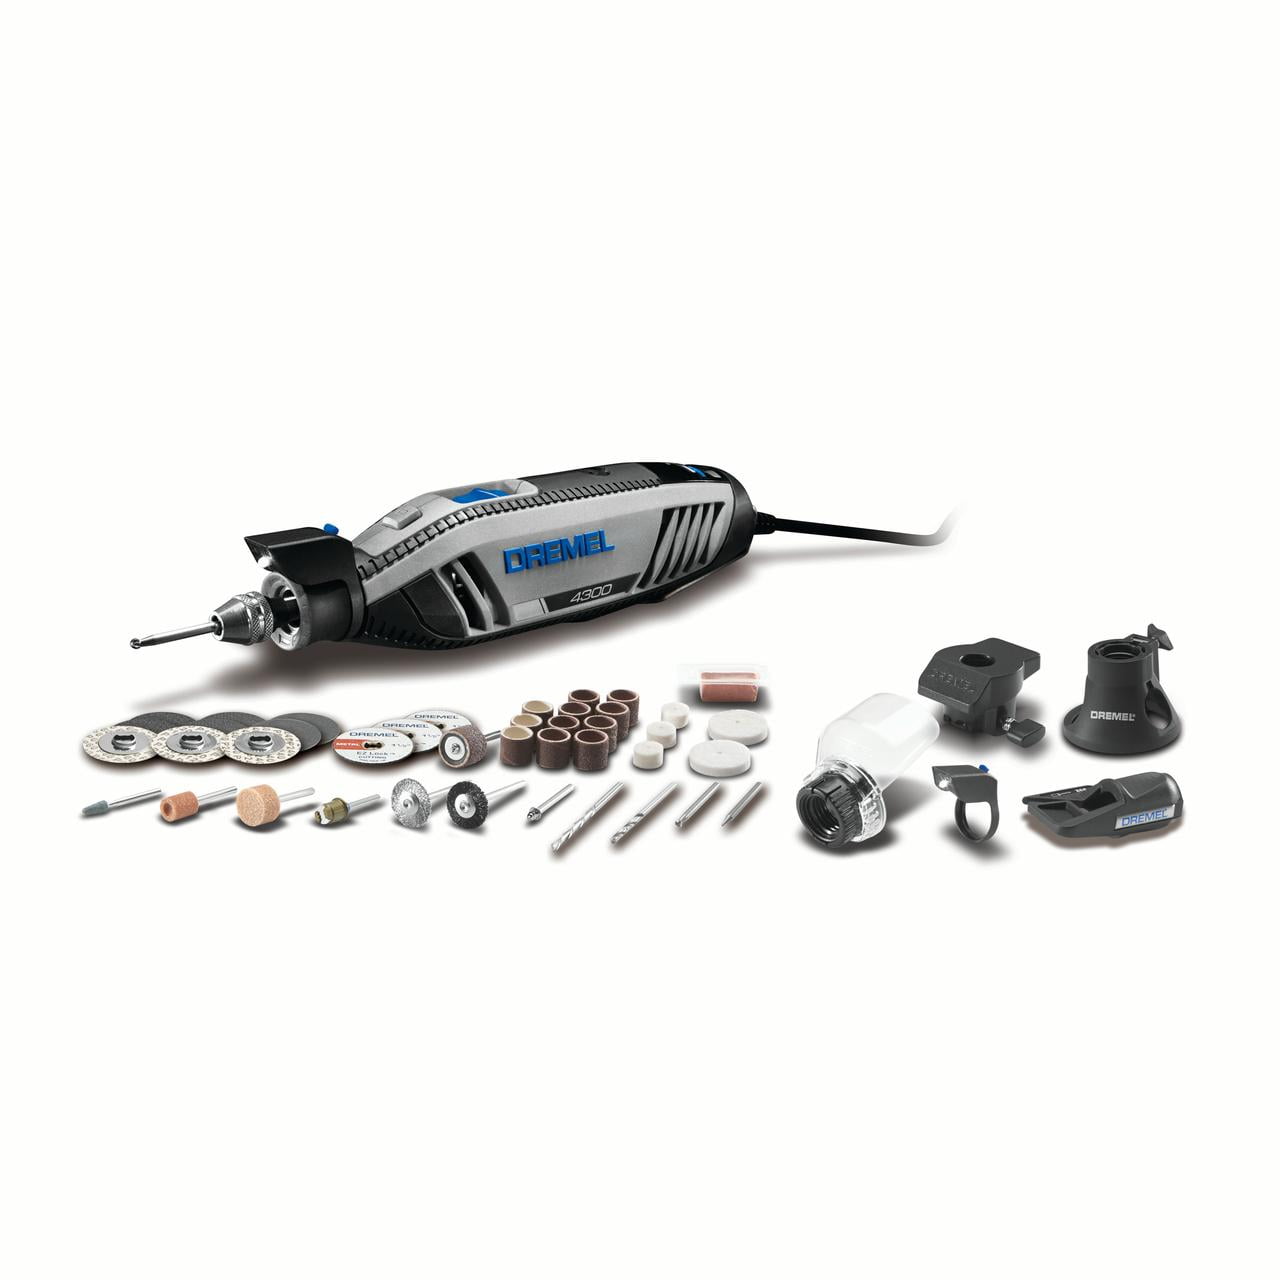 4300 Series 1.8 Amp Variable Speed Corded Rotary Tool Kit w/ Mounted Light,  40 Accessories, 5 Attachments, Carrying Case